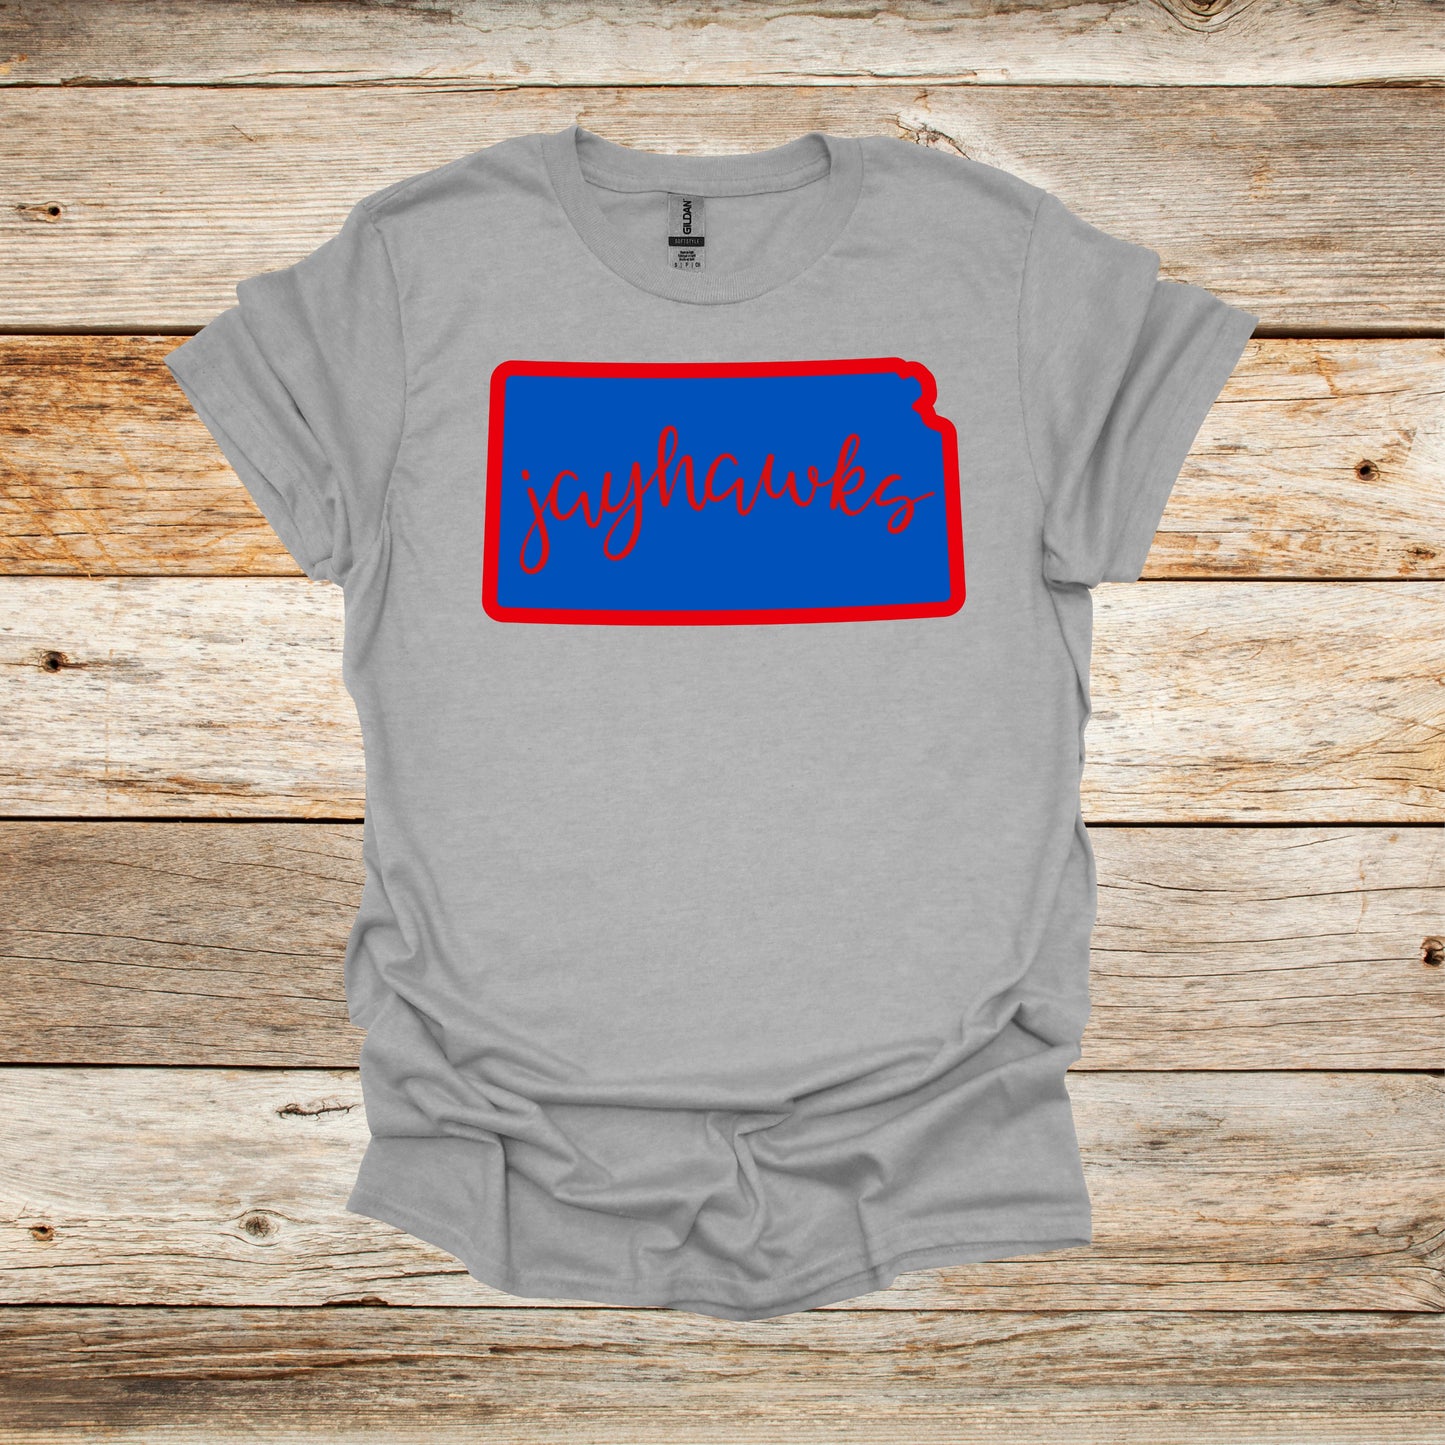 College T Shirt - Kansas Jayhawks - State Outline - Adult and Children's Tee Shirts T-Shirts Graphic Avenue Sport Grey Adult Small 